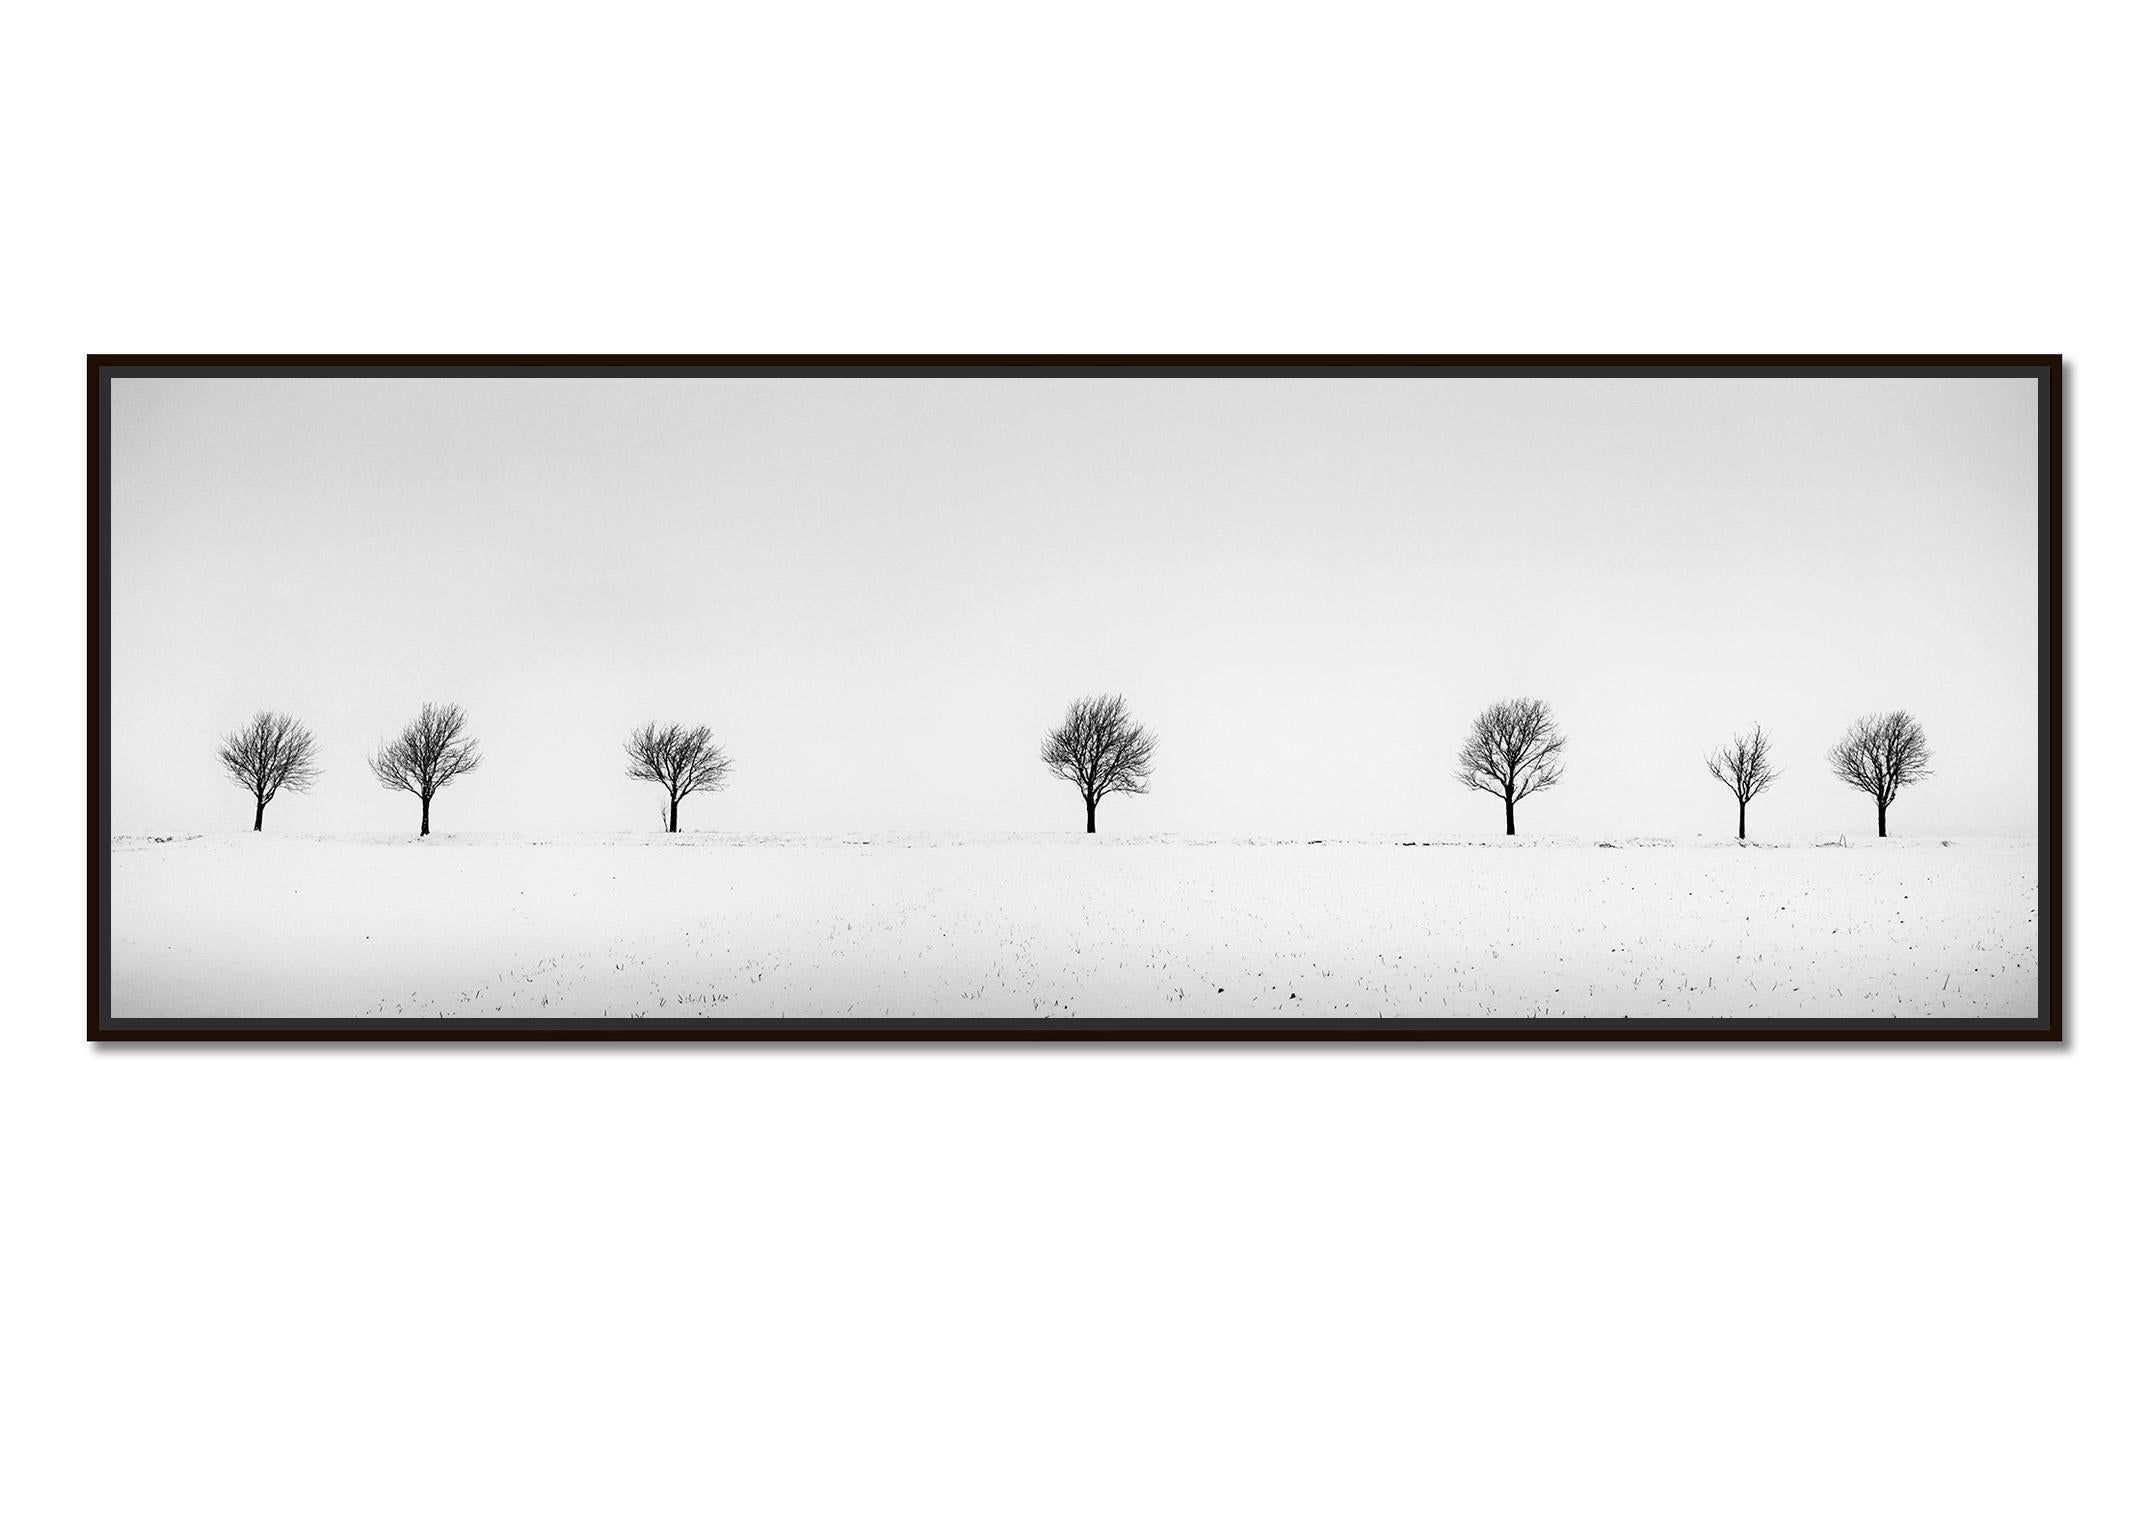 Cherry Trees in Snow Field, Panorama, black and white photography, landscape - Photograph by Gerald Berghammer